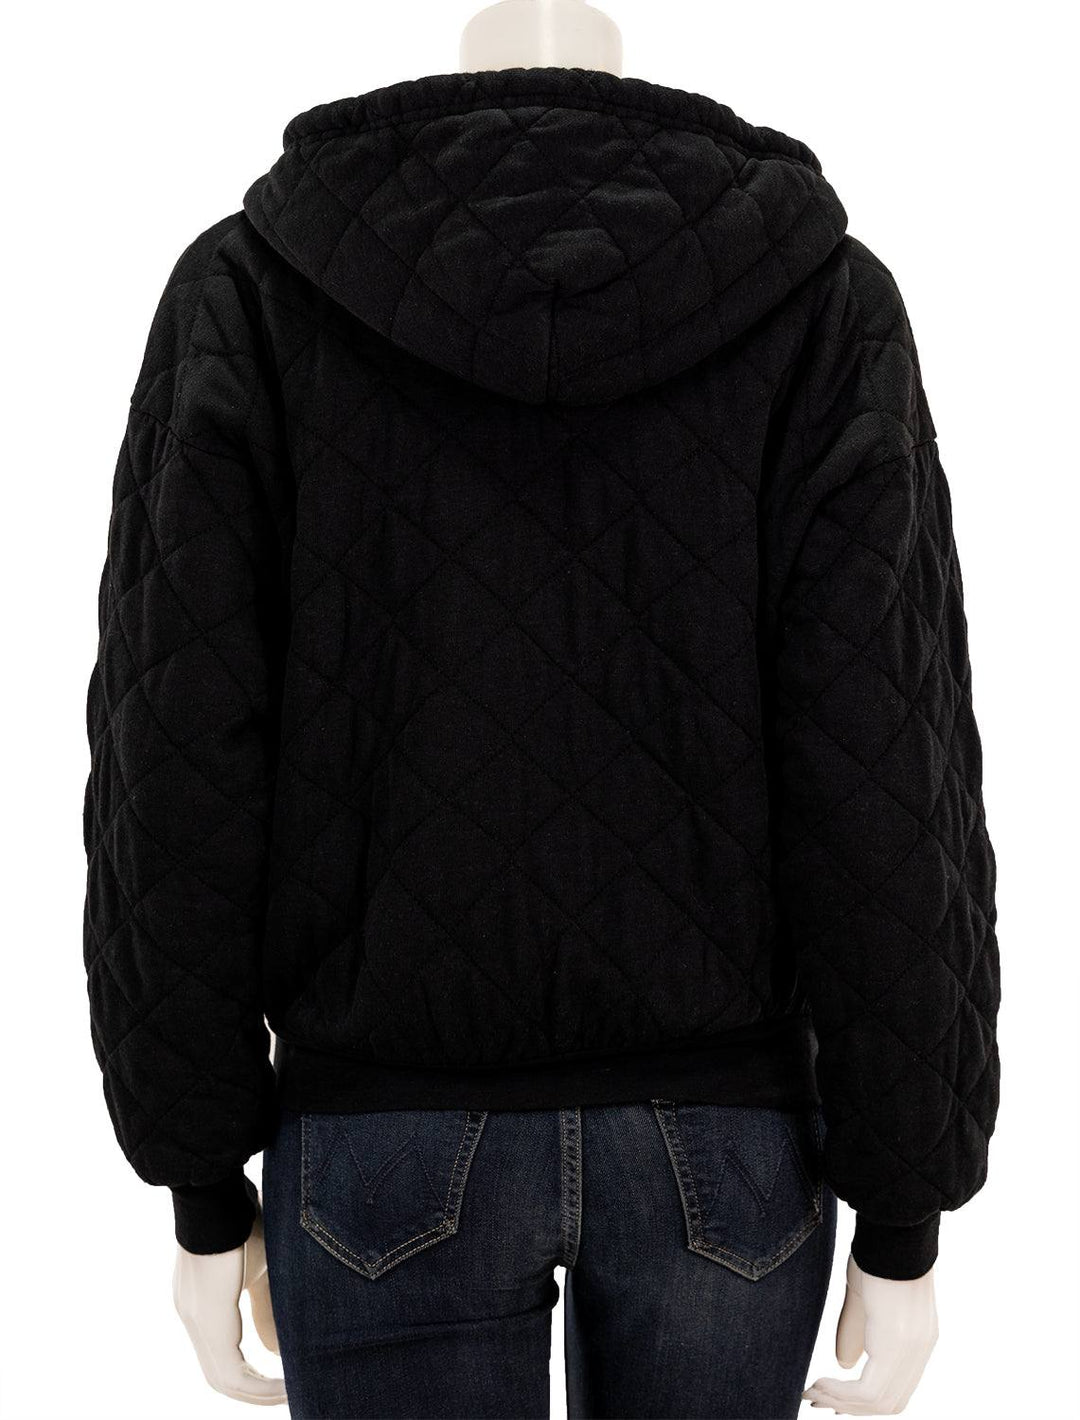 Back view of Aviator Nation's quilted zip hoodie relaxed in black.